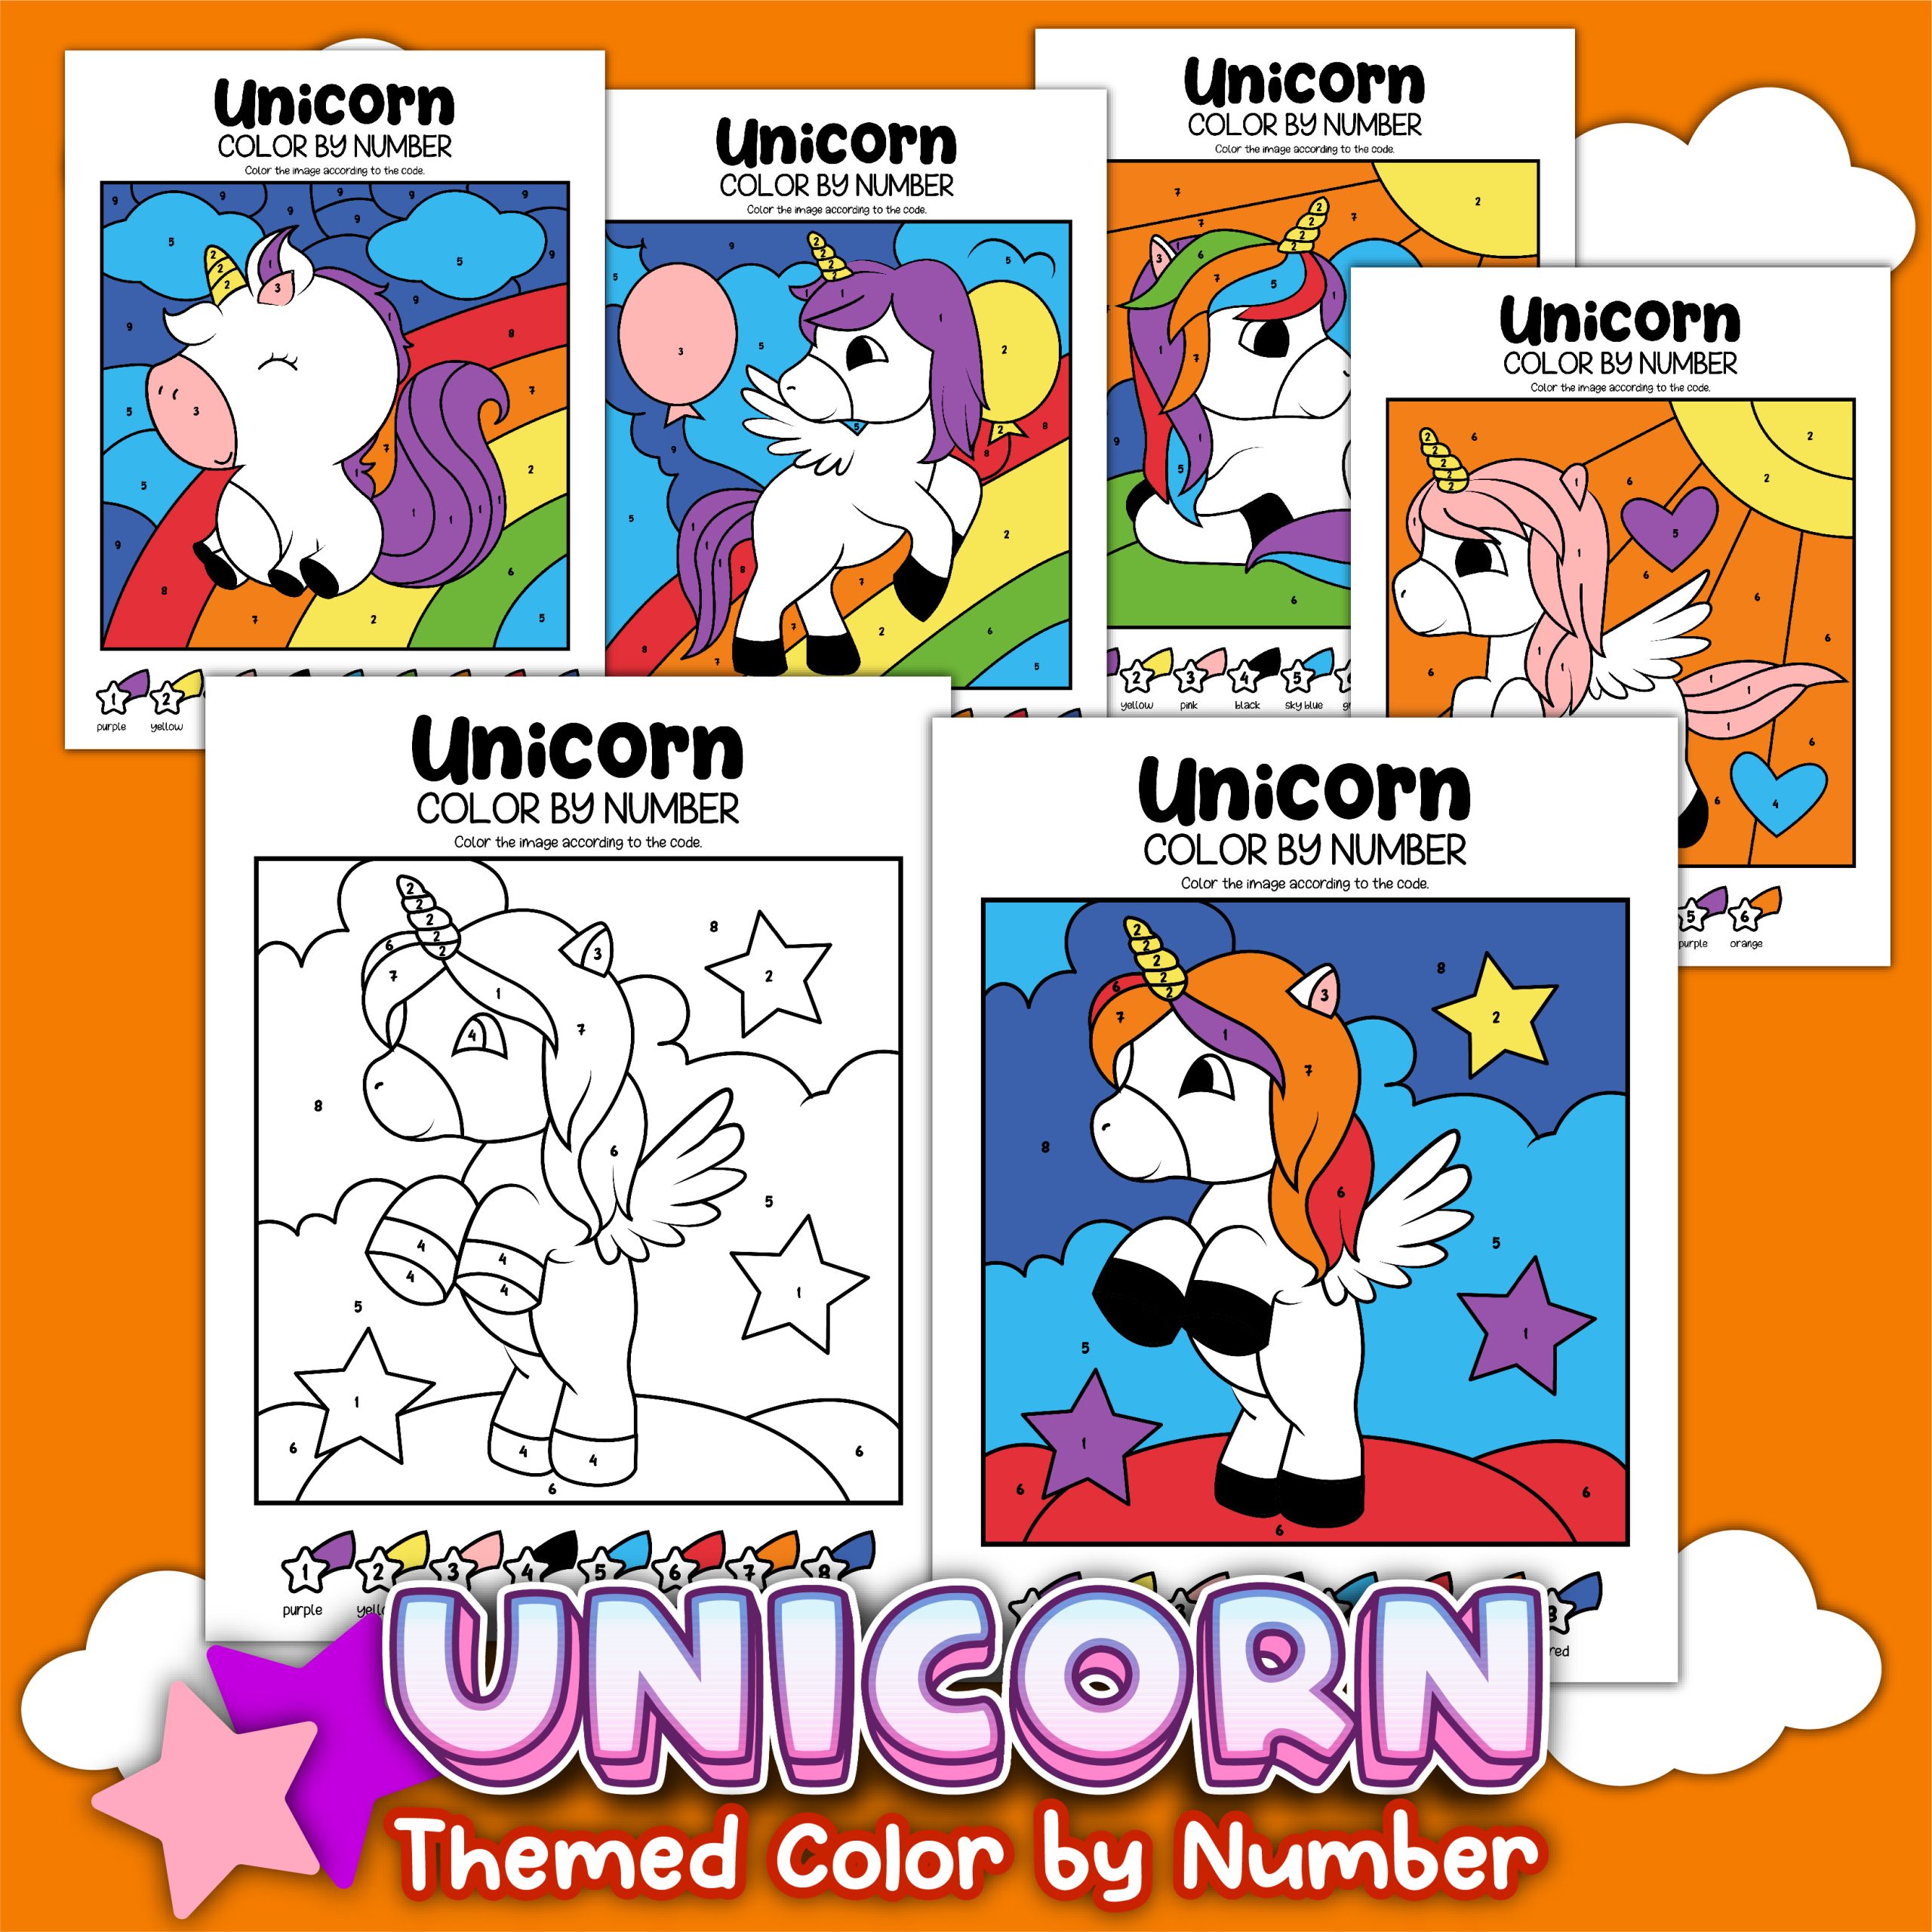 Unicorn Color by Number (Free Printable)